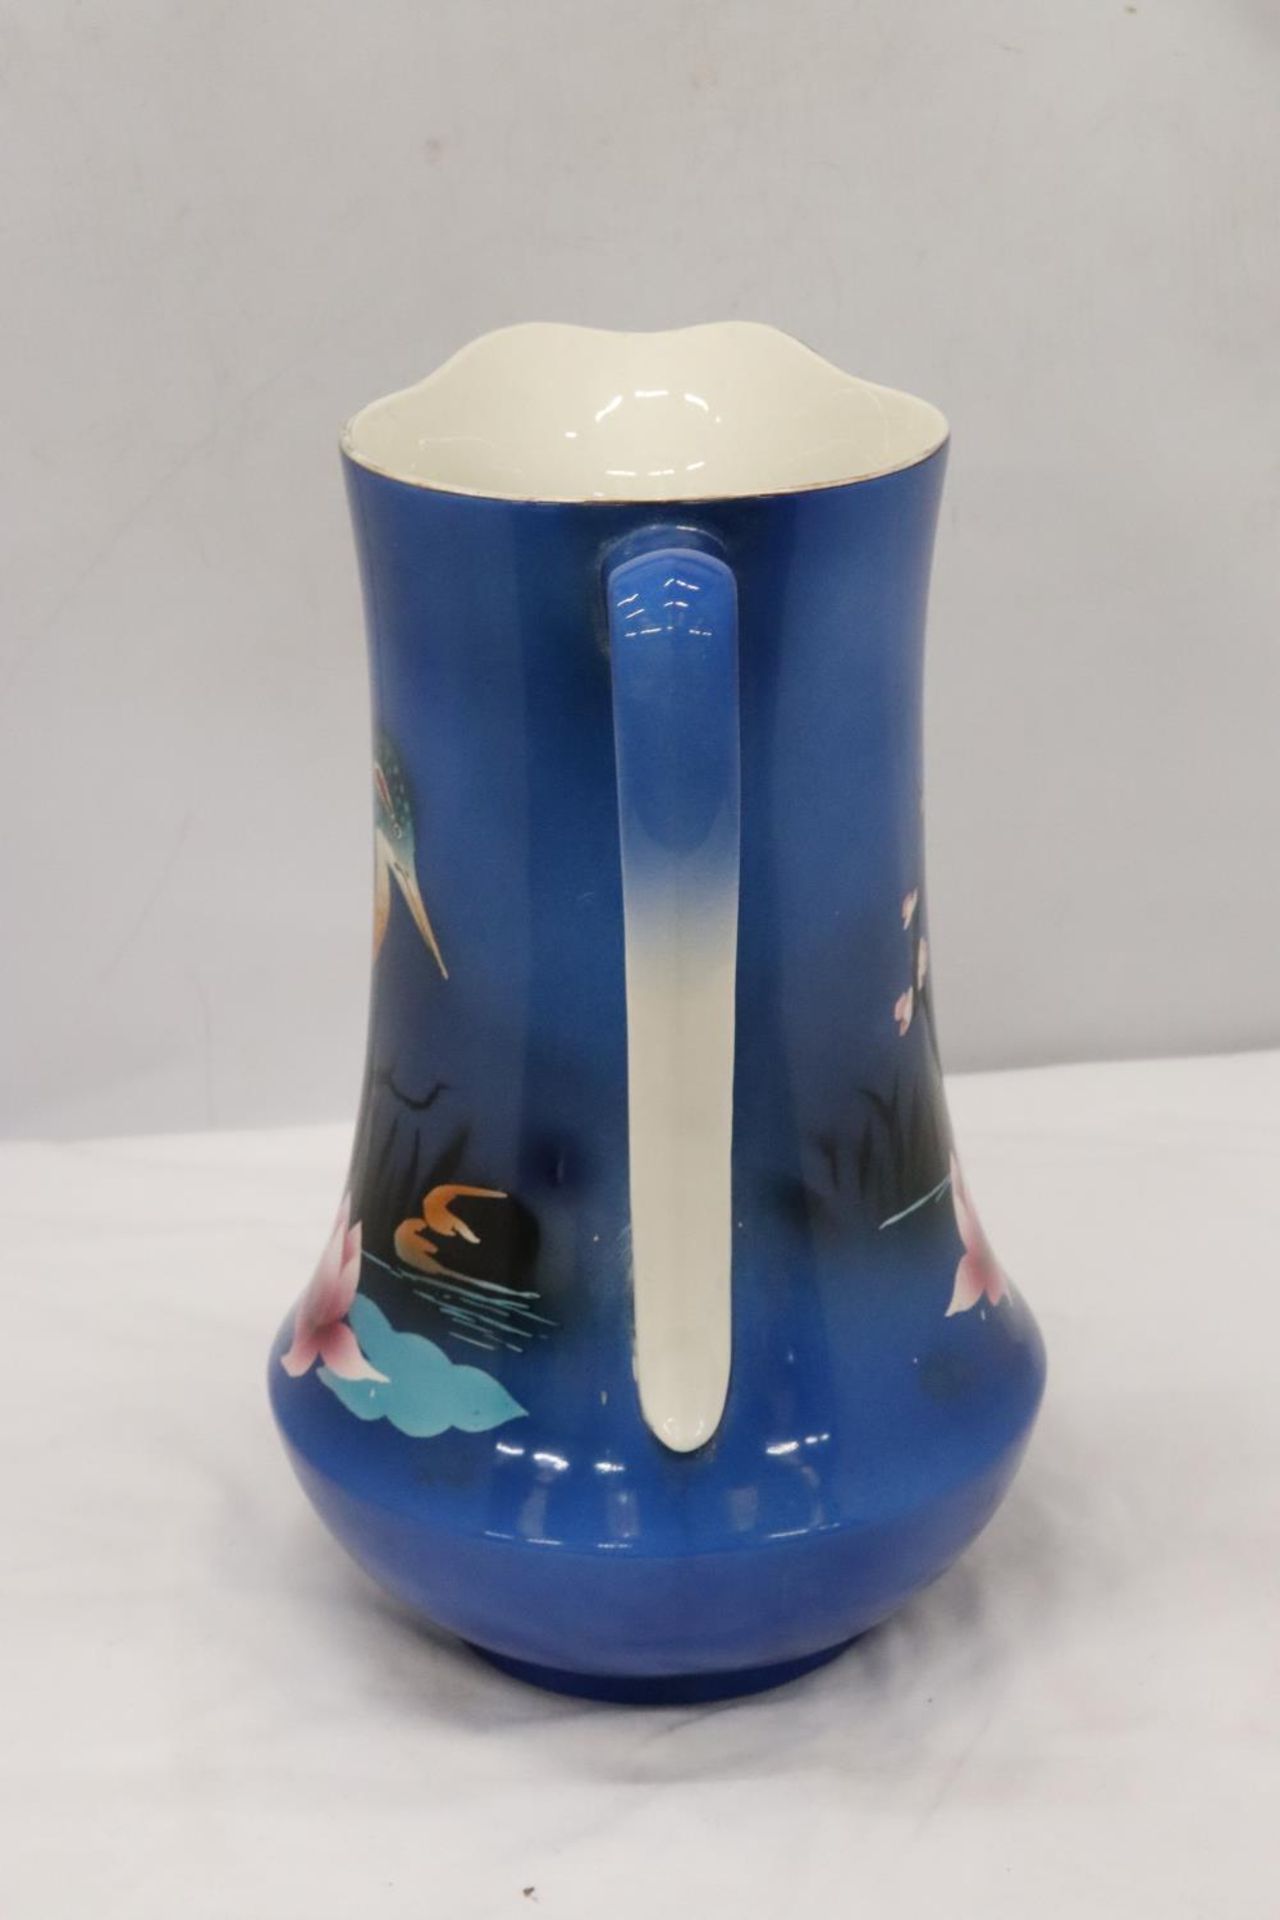 A LARGE ROYAL VENTON WARE (1930'S) JUG WITH KINGFISHER DESIGN - Image 4 of 6